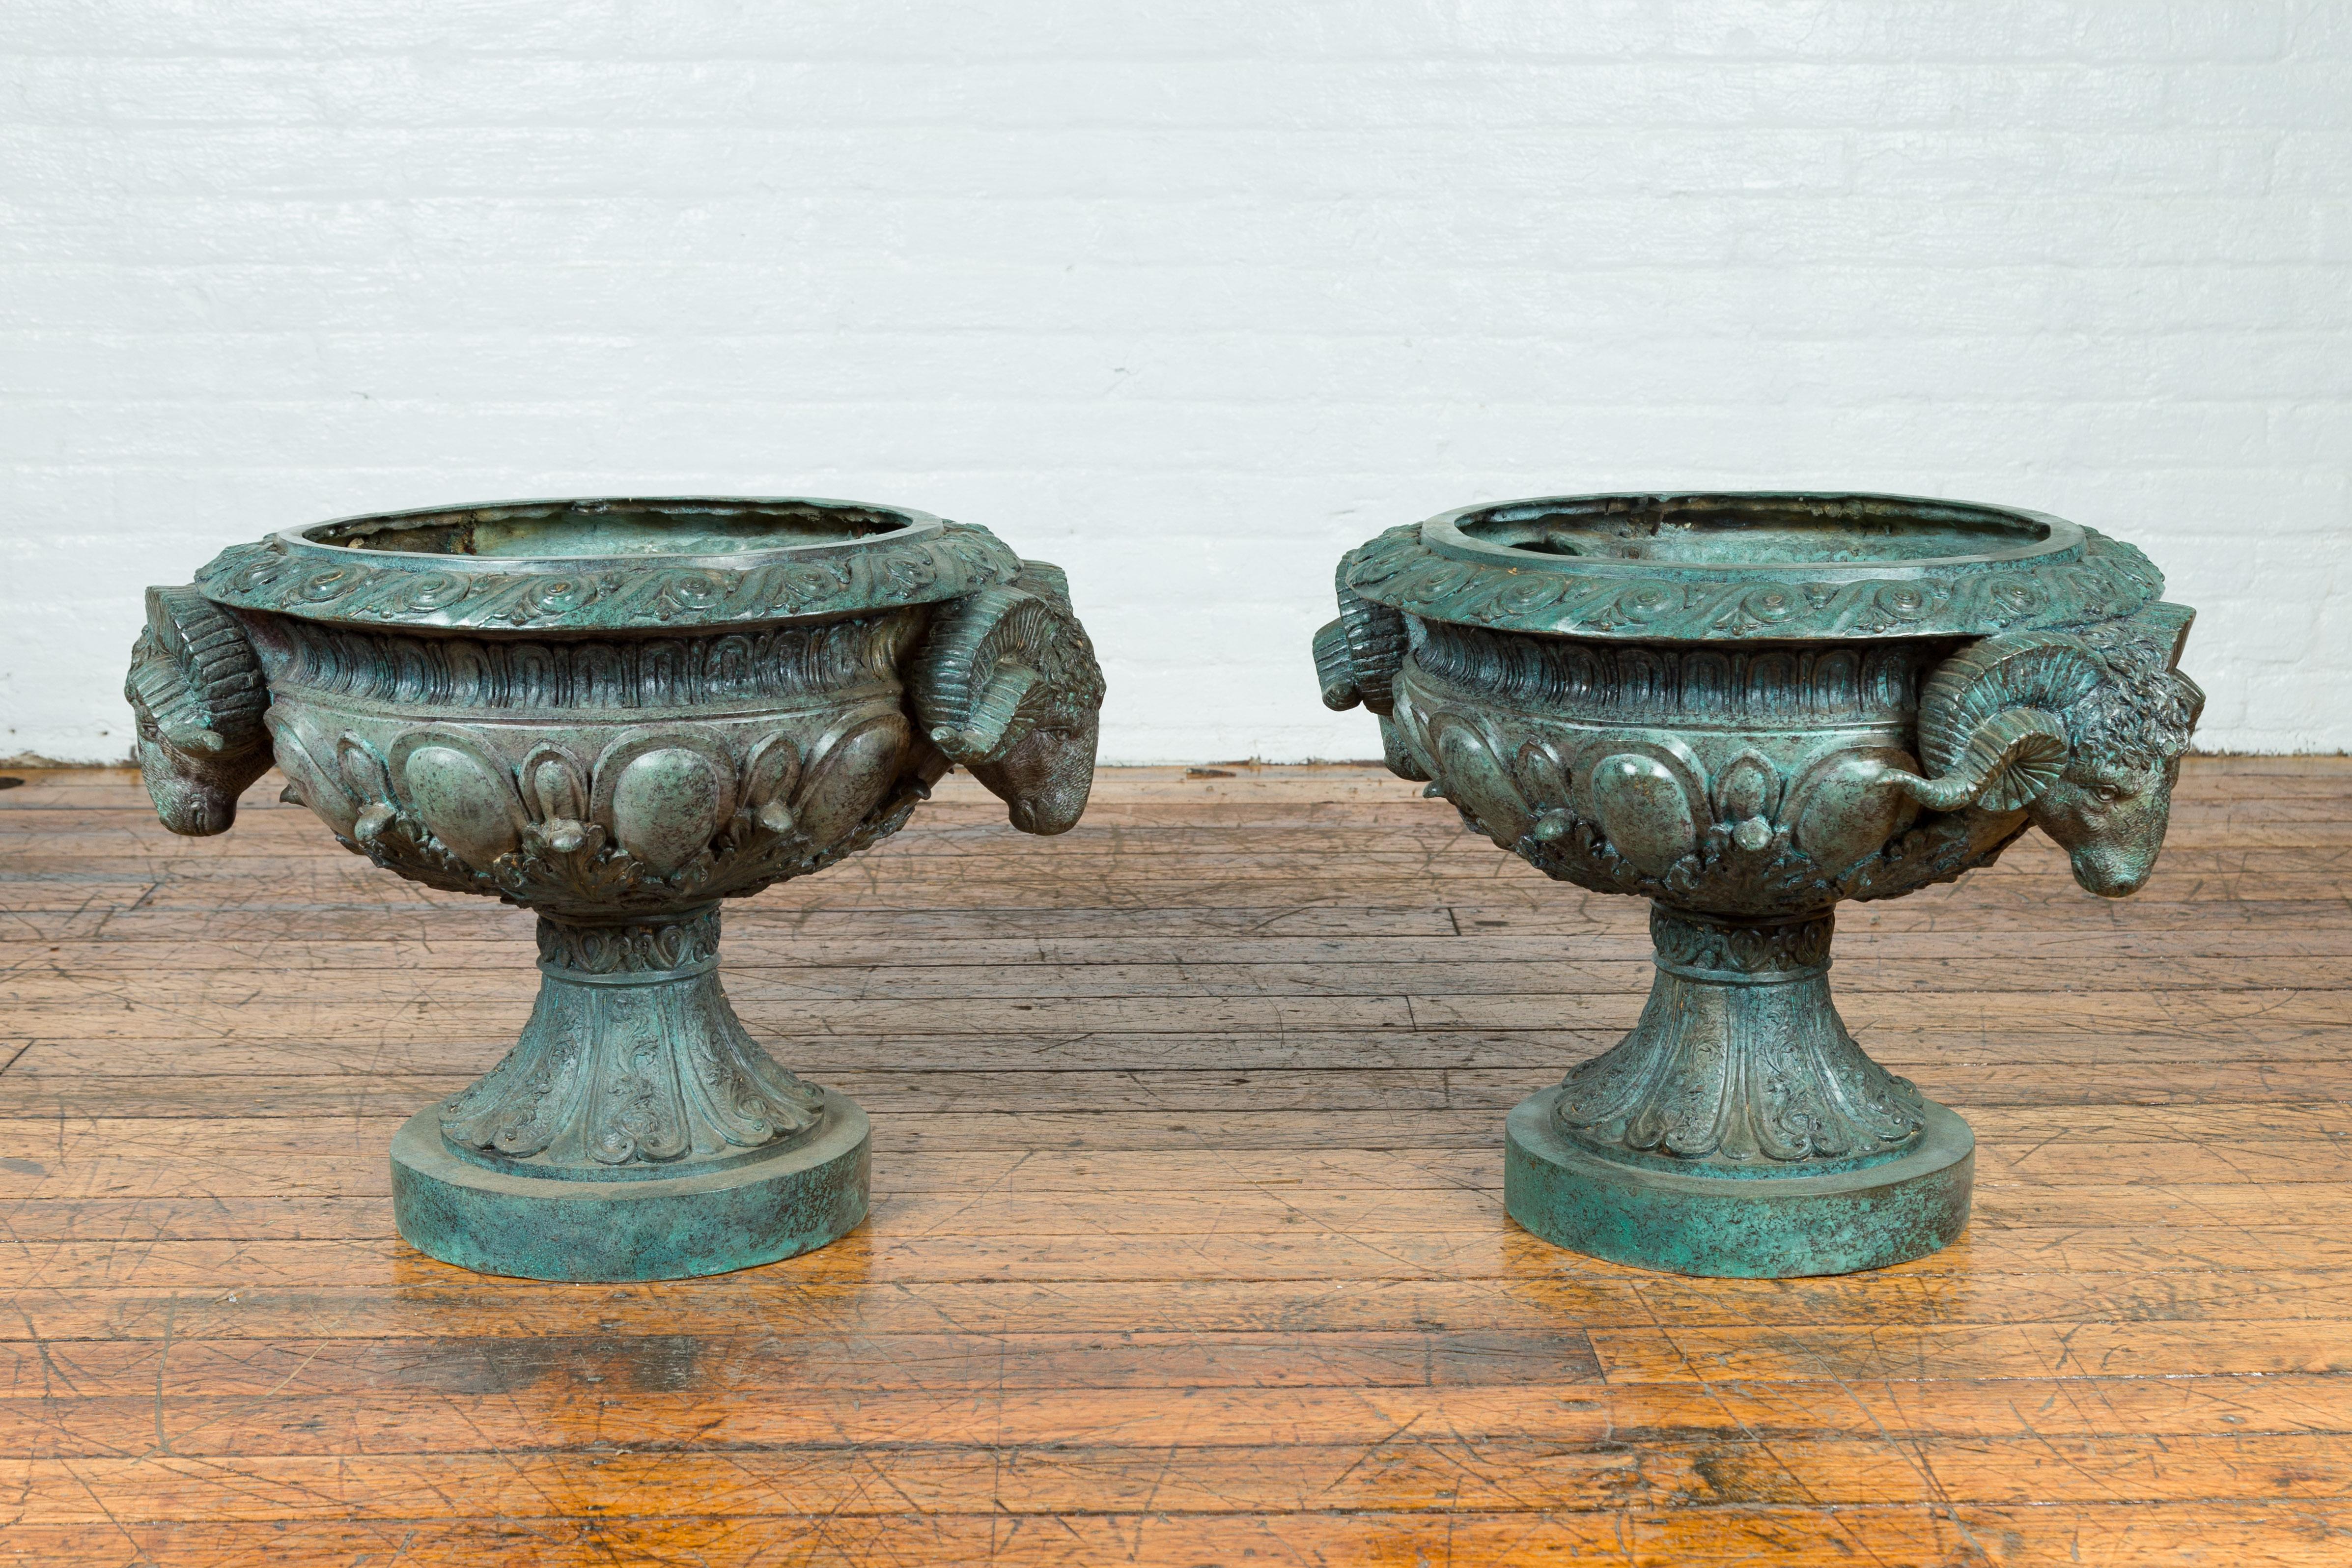 Greco Roman Style Vintage Verde Patina Bronze Urns with Rams' Heads, Sold Each 14